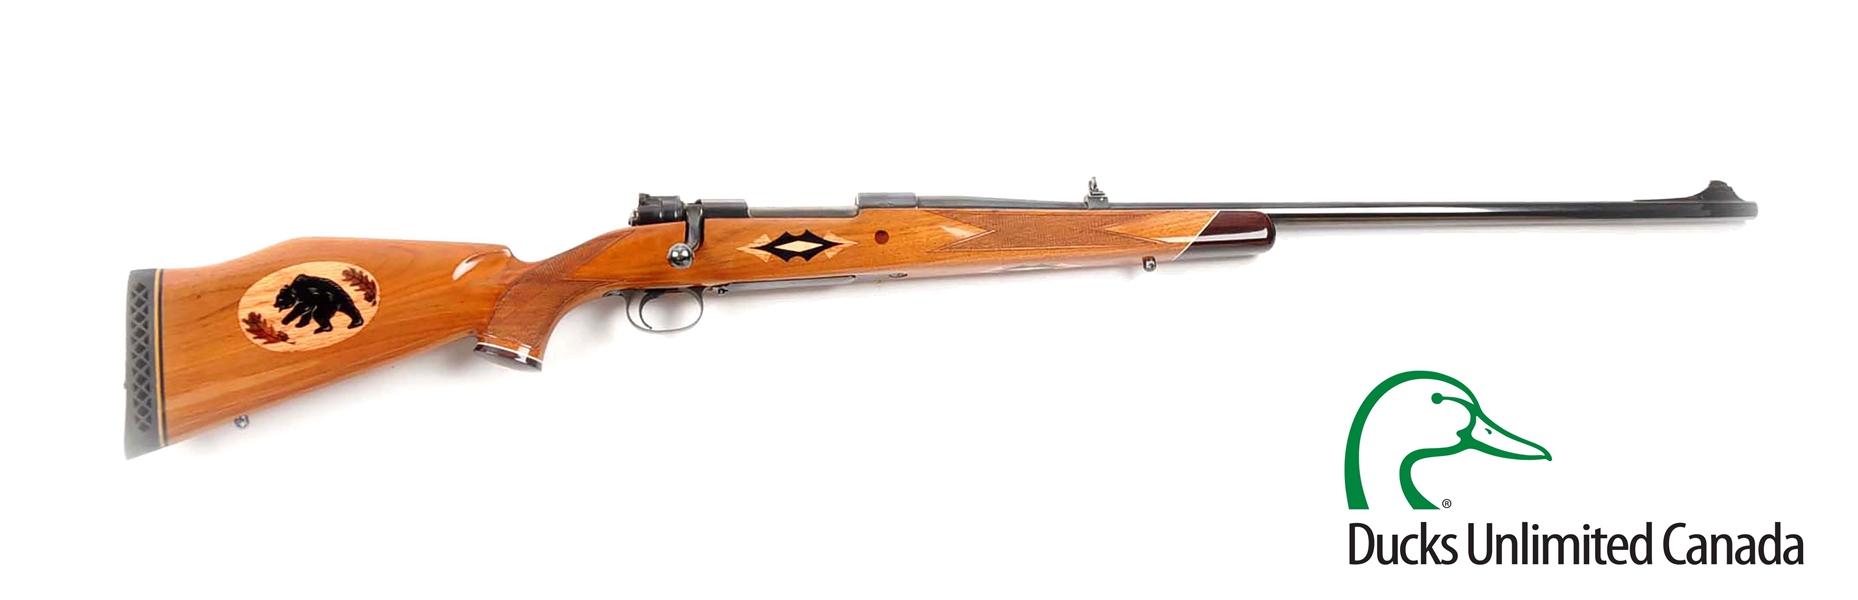 (C) EARLY CUSTOM FN MAUSER WEATHERBY .375 MAGNUM RIFLE.